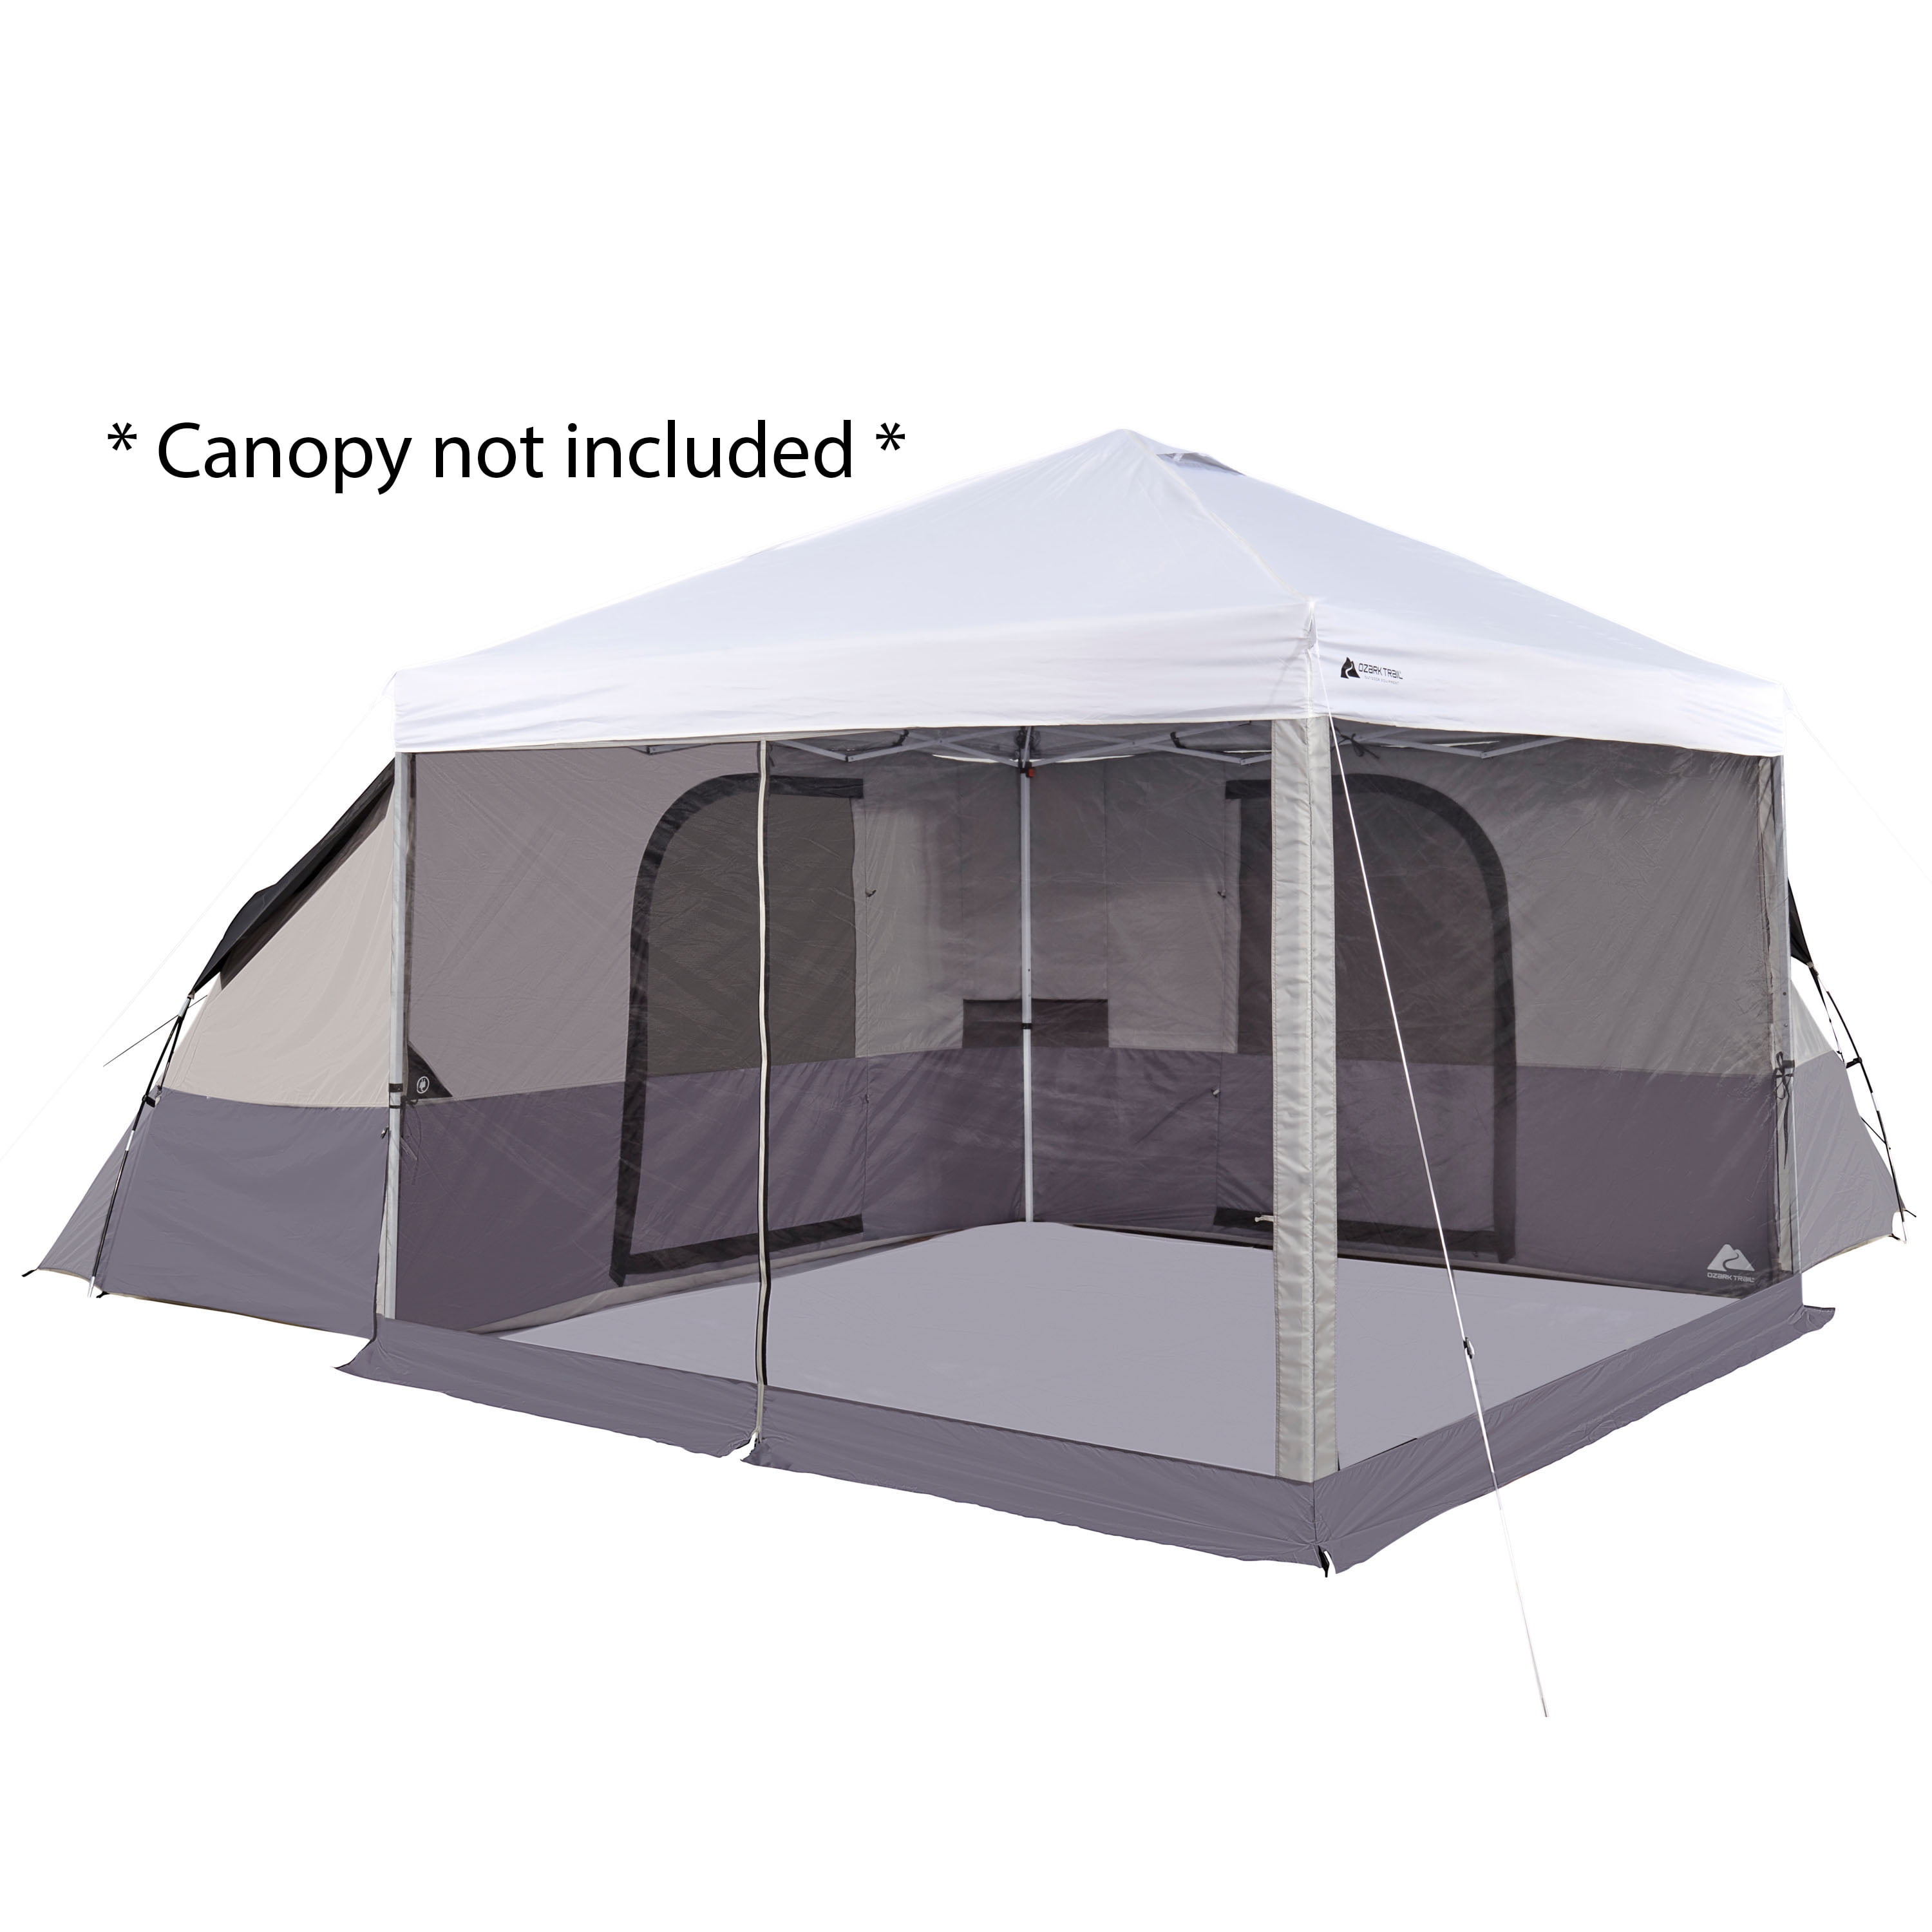 Straight-leg Canopy Sold Separately Camping Outdoor Tent 4-Person ConnecTent 